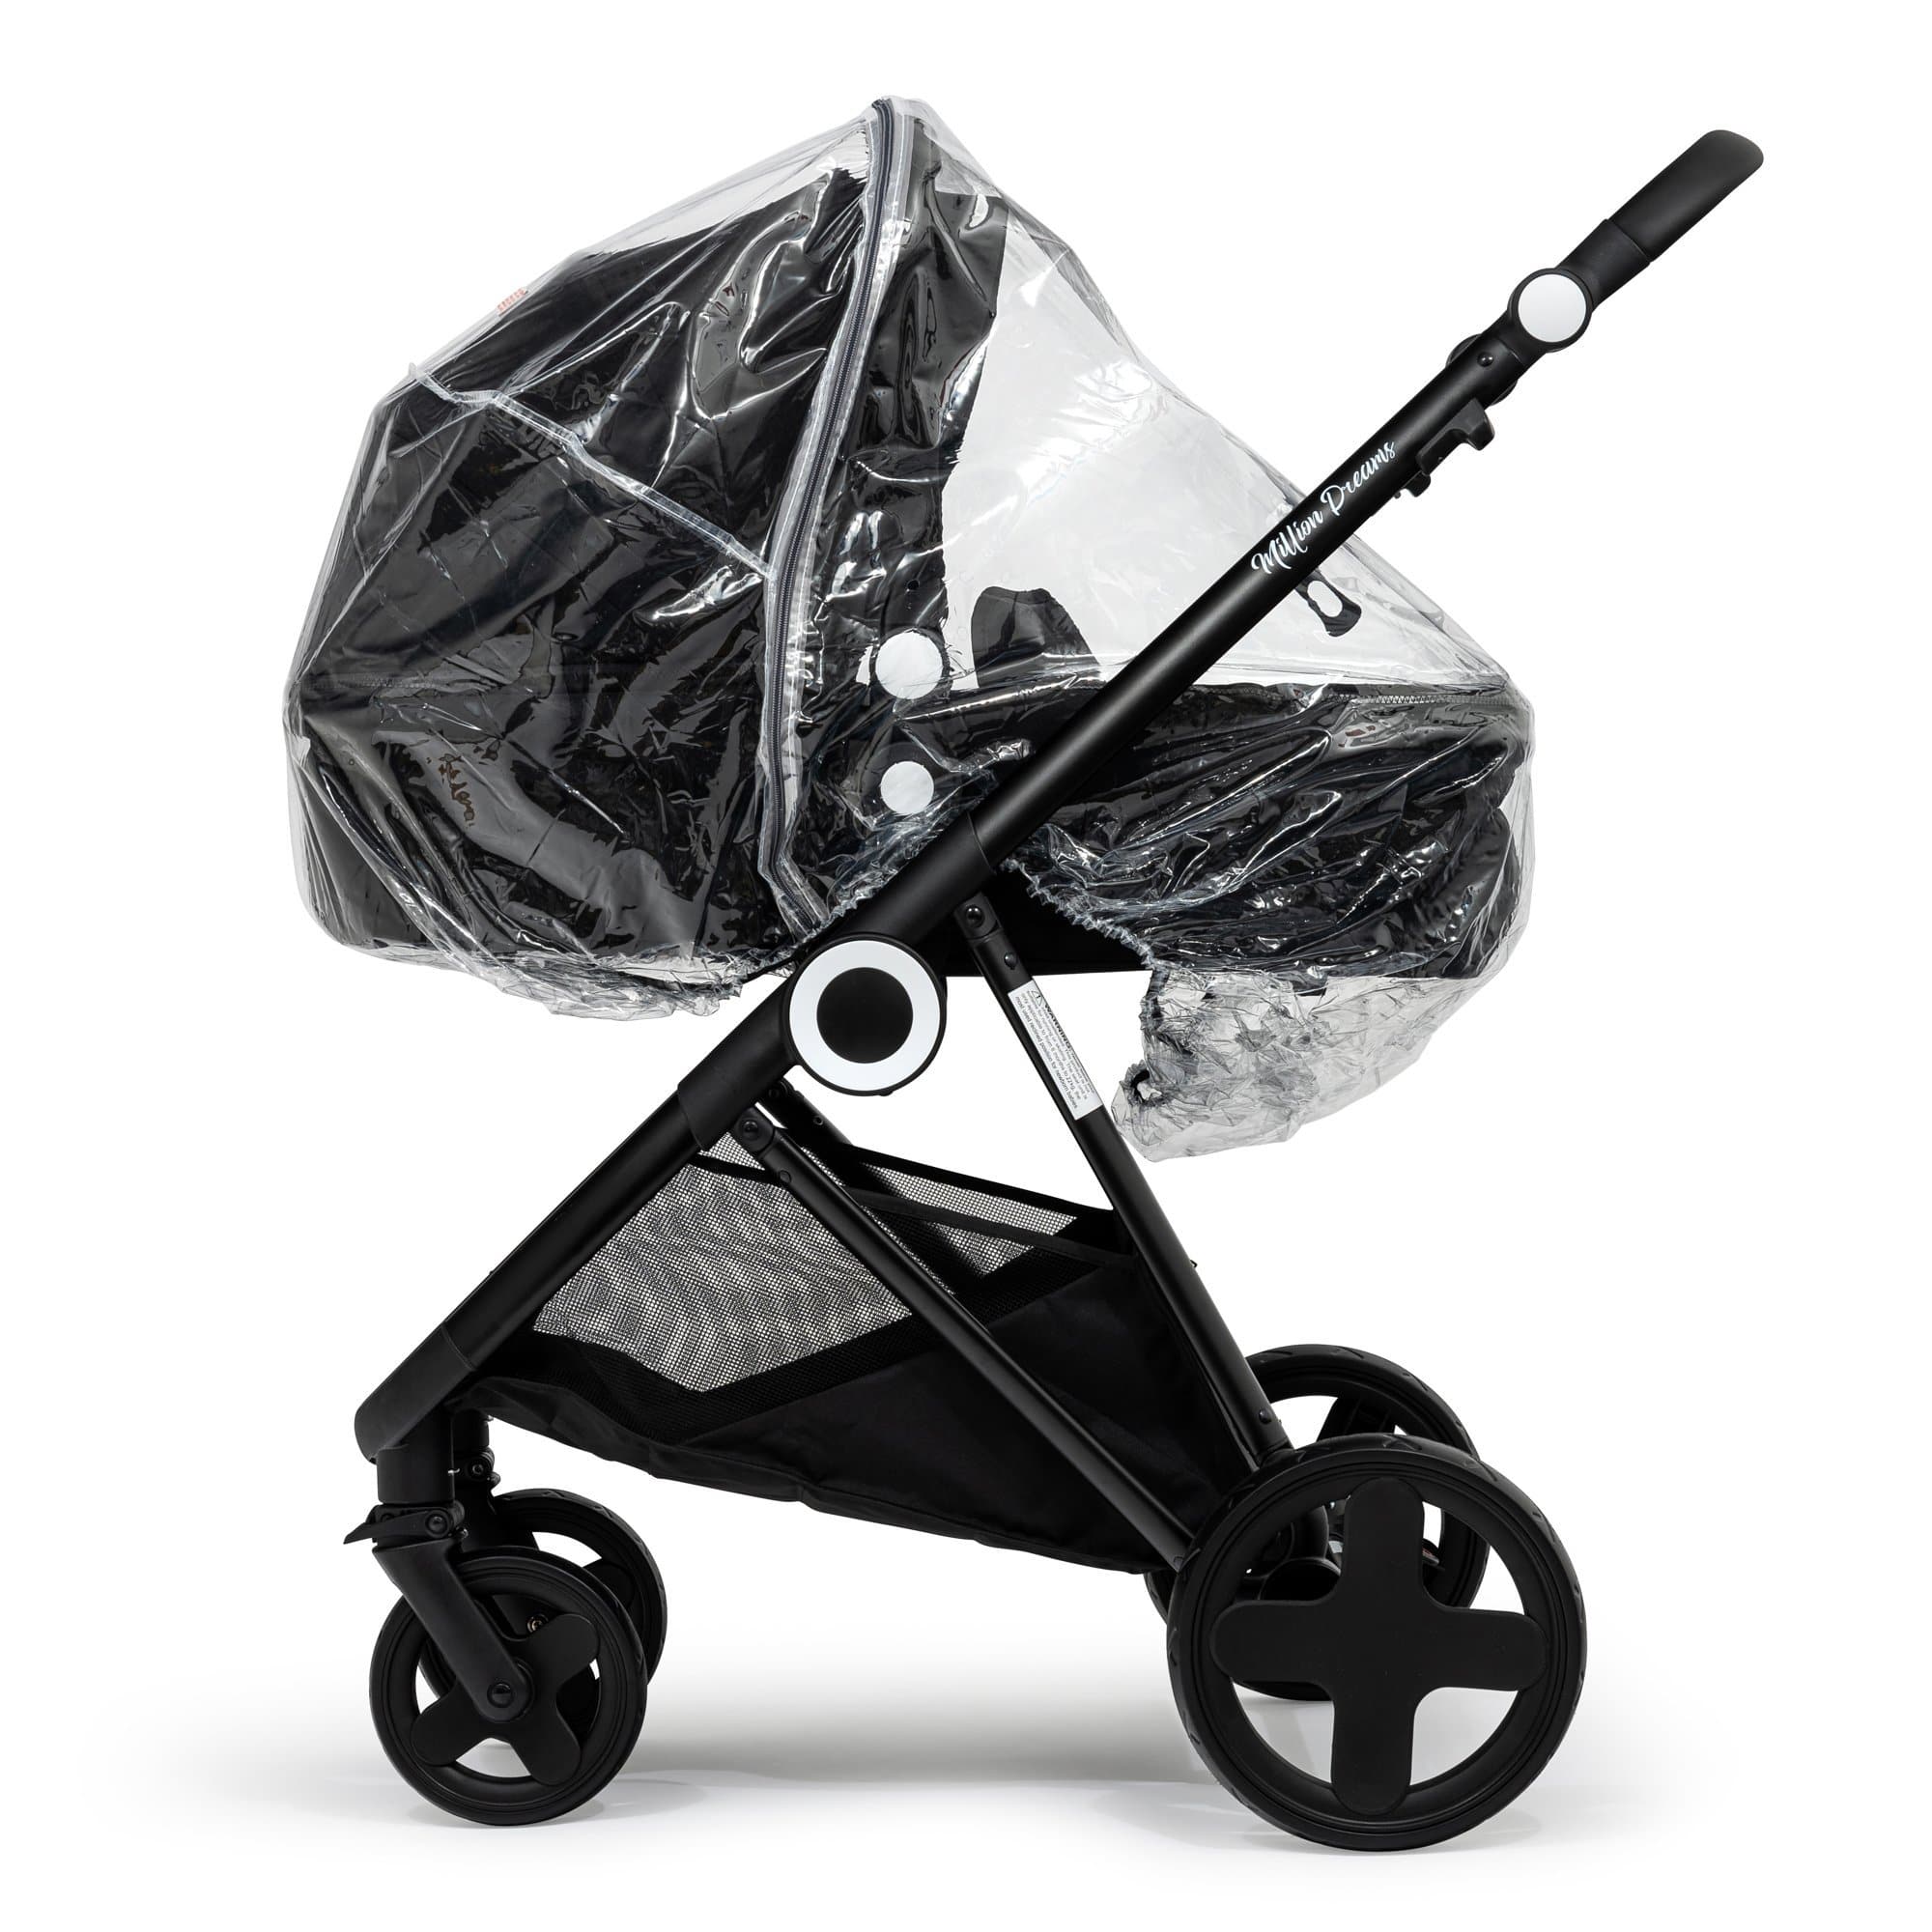 2 in 1 Rain Cover Compatible with Quax - Fits All Models - For Your Little One